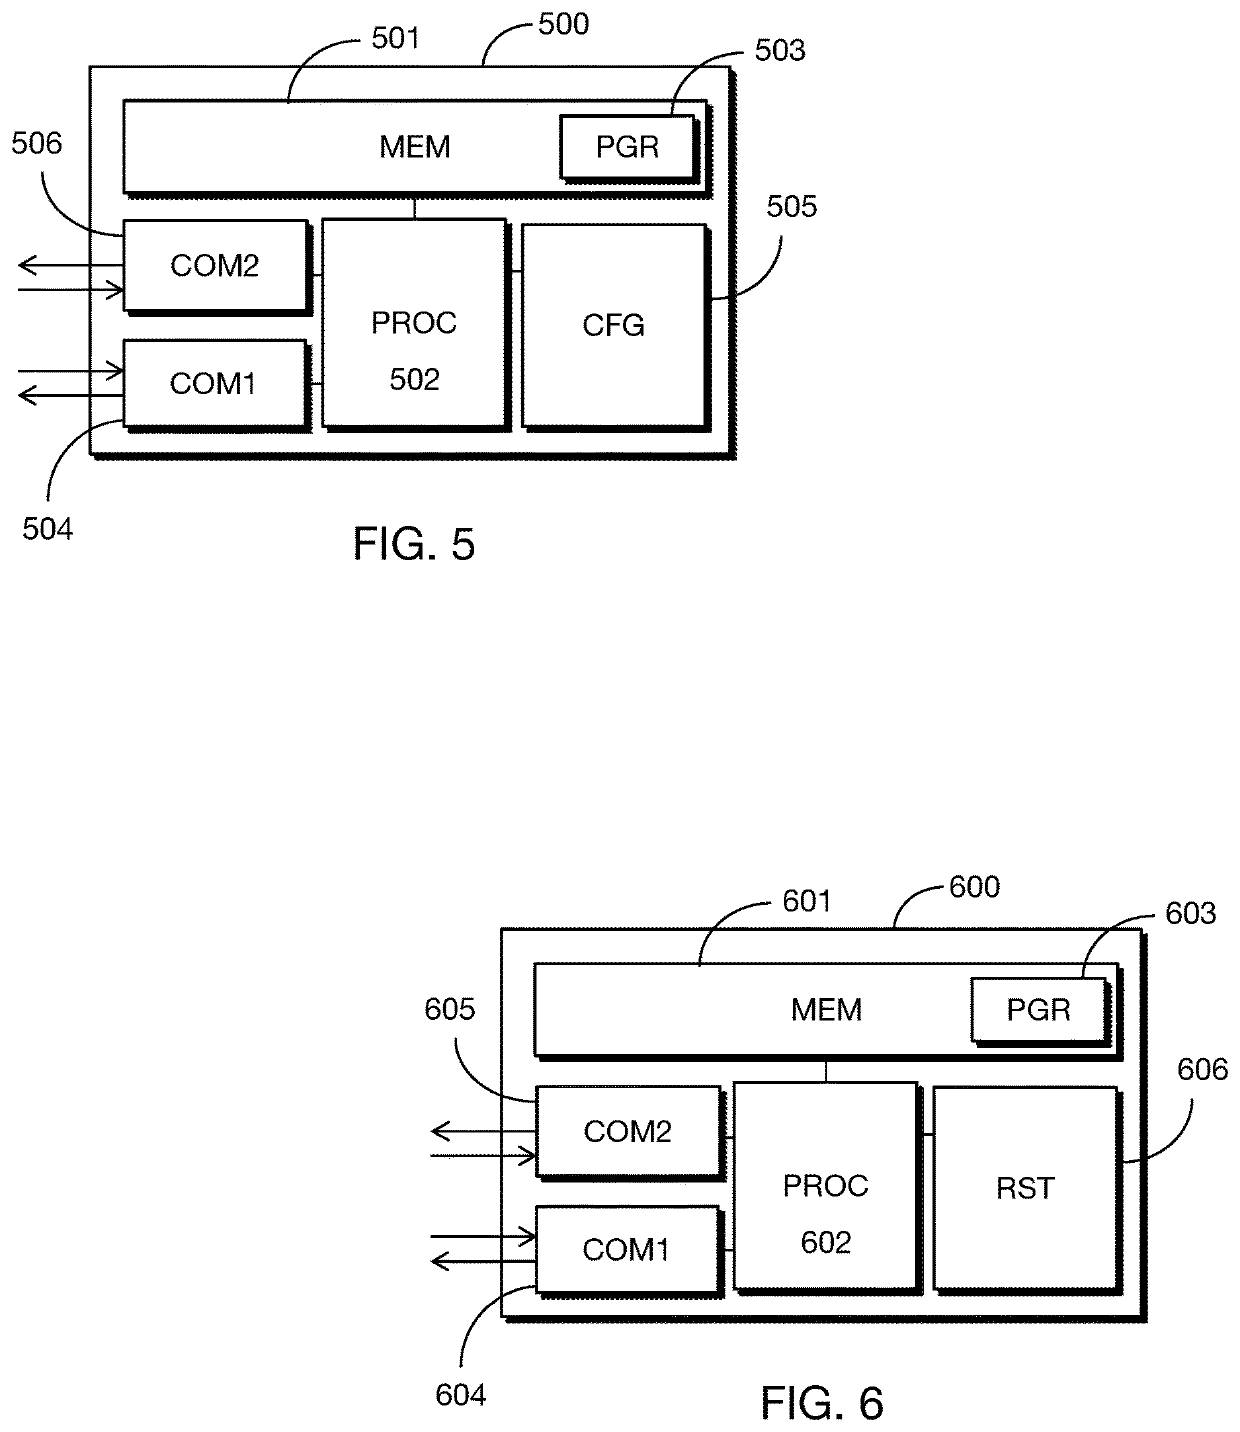 Method for establishing a communication with an interactive server